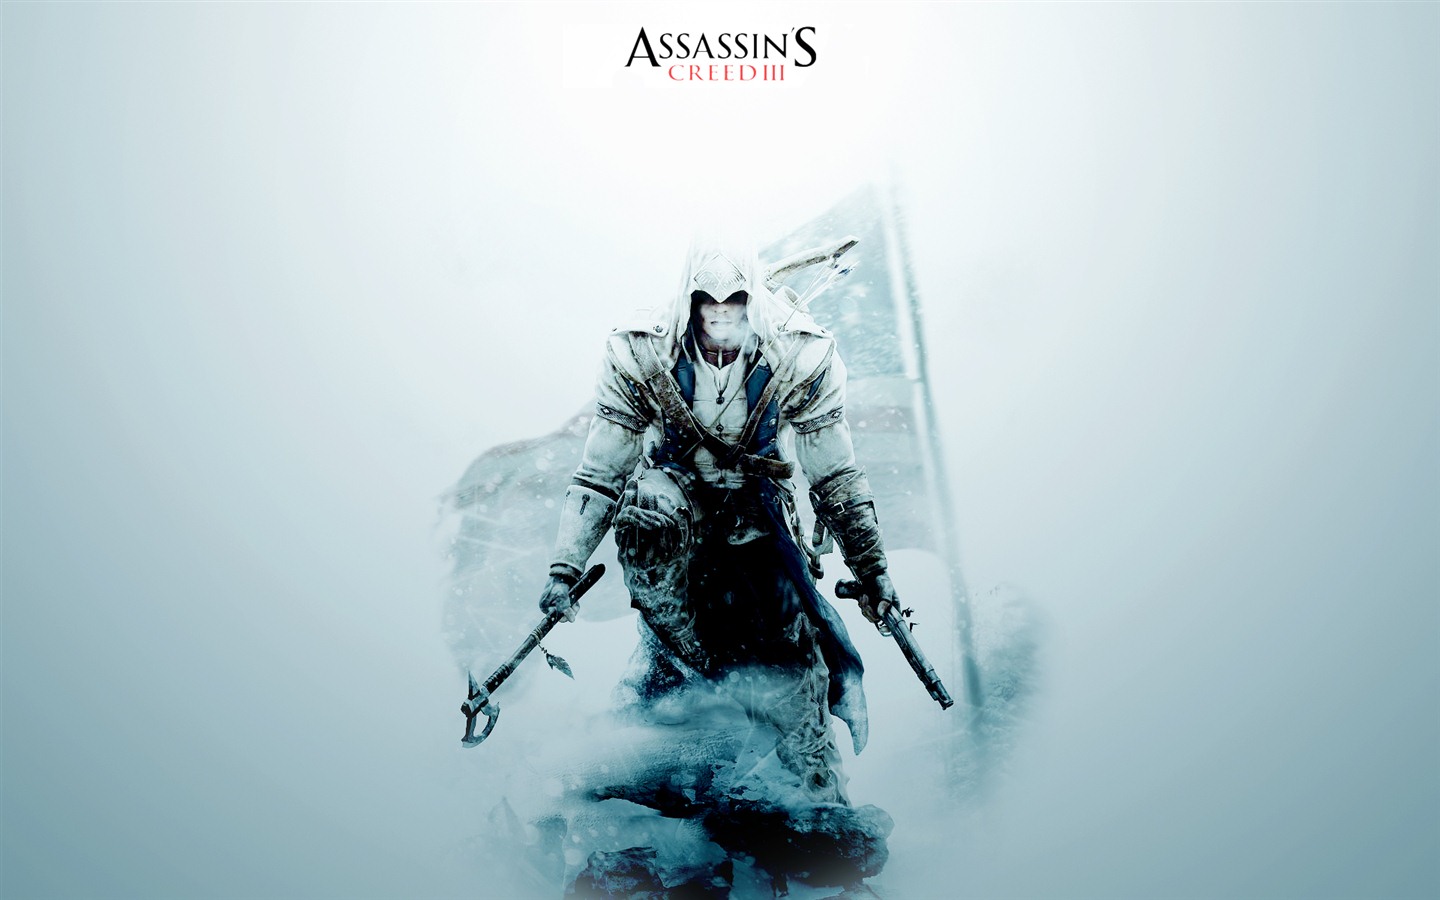 Assassin's Creed 3 HD wallpapers #11 - 1440x900